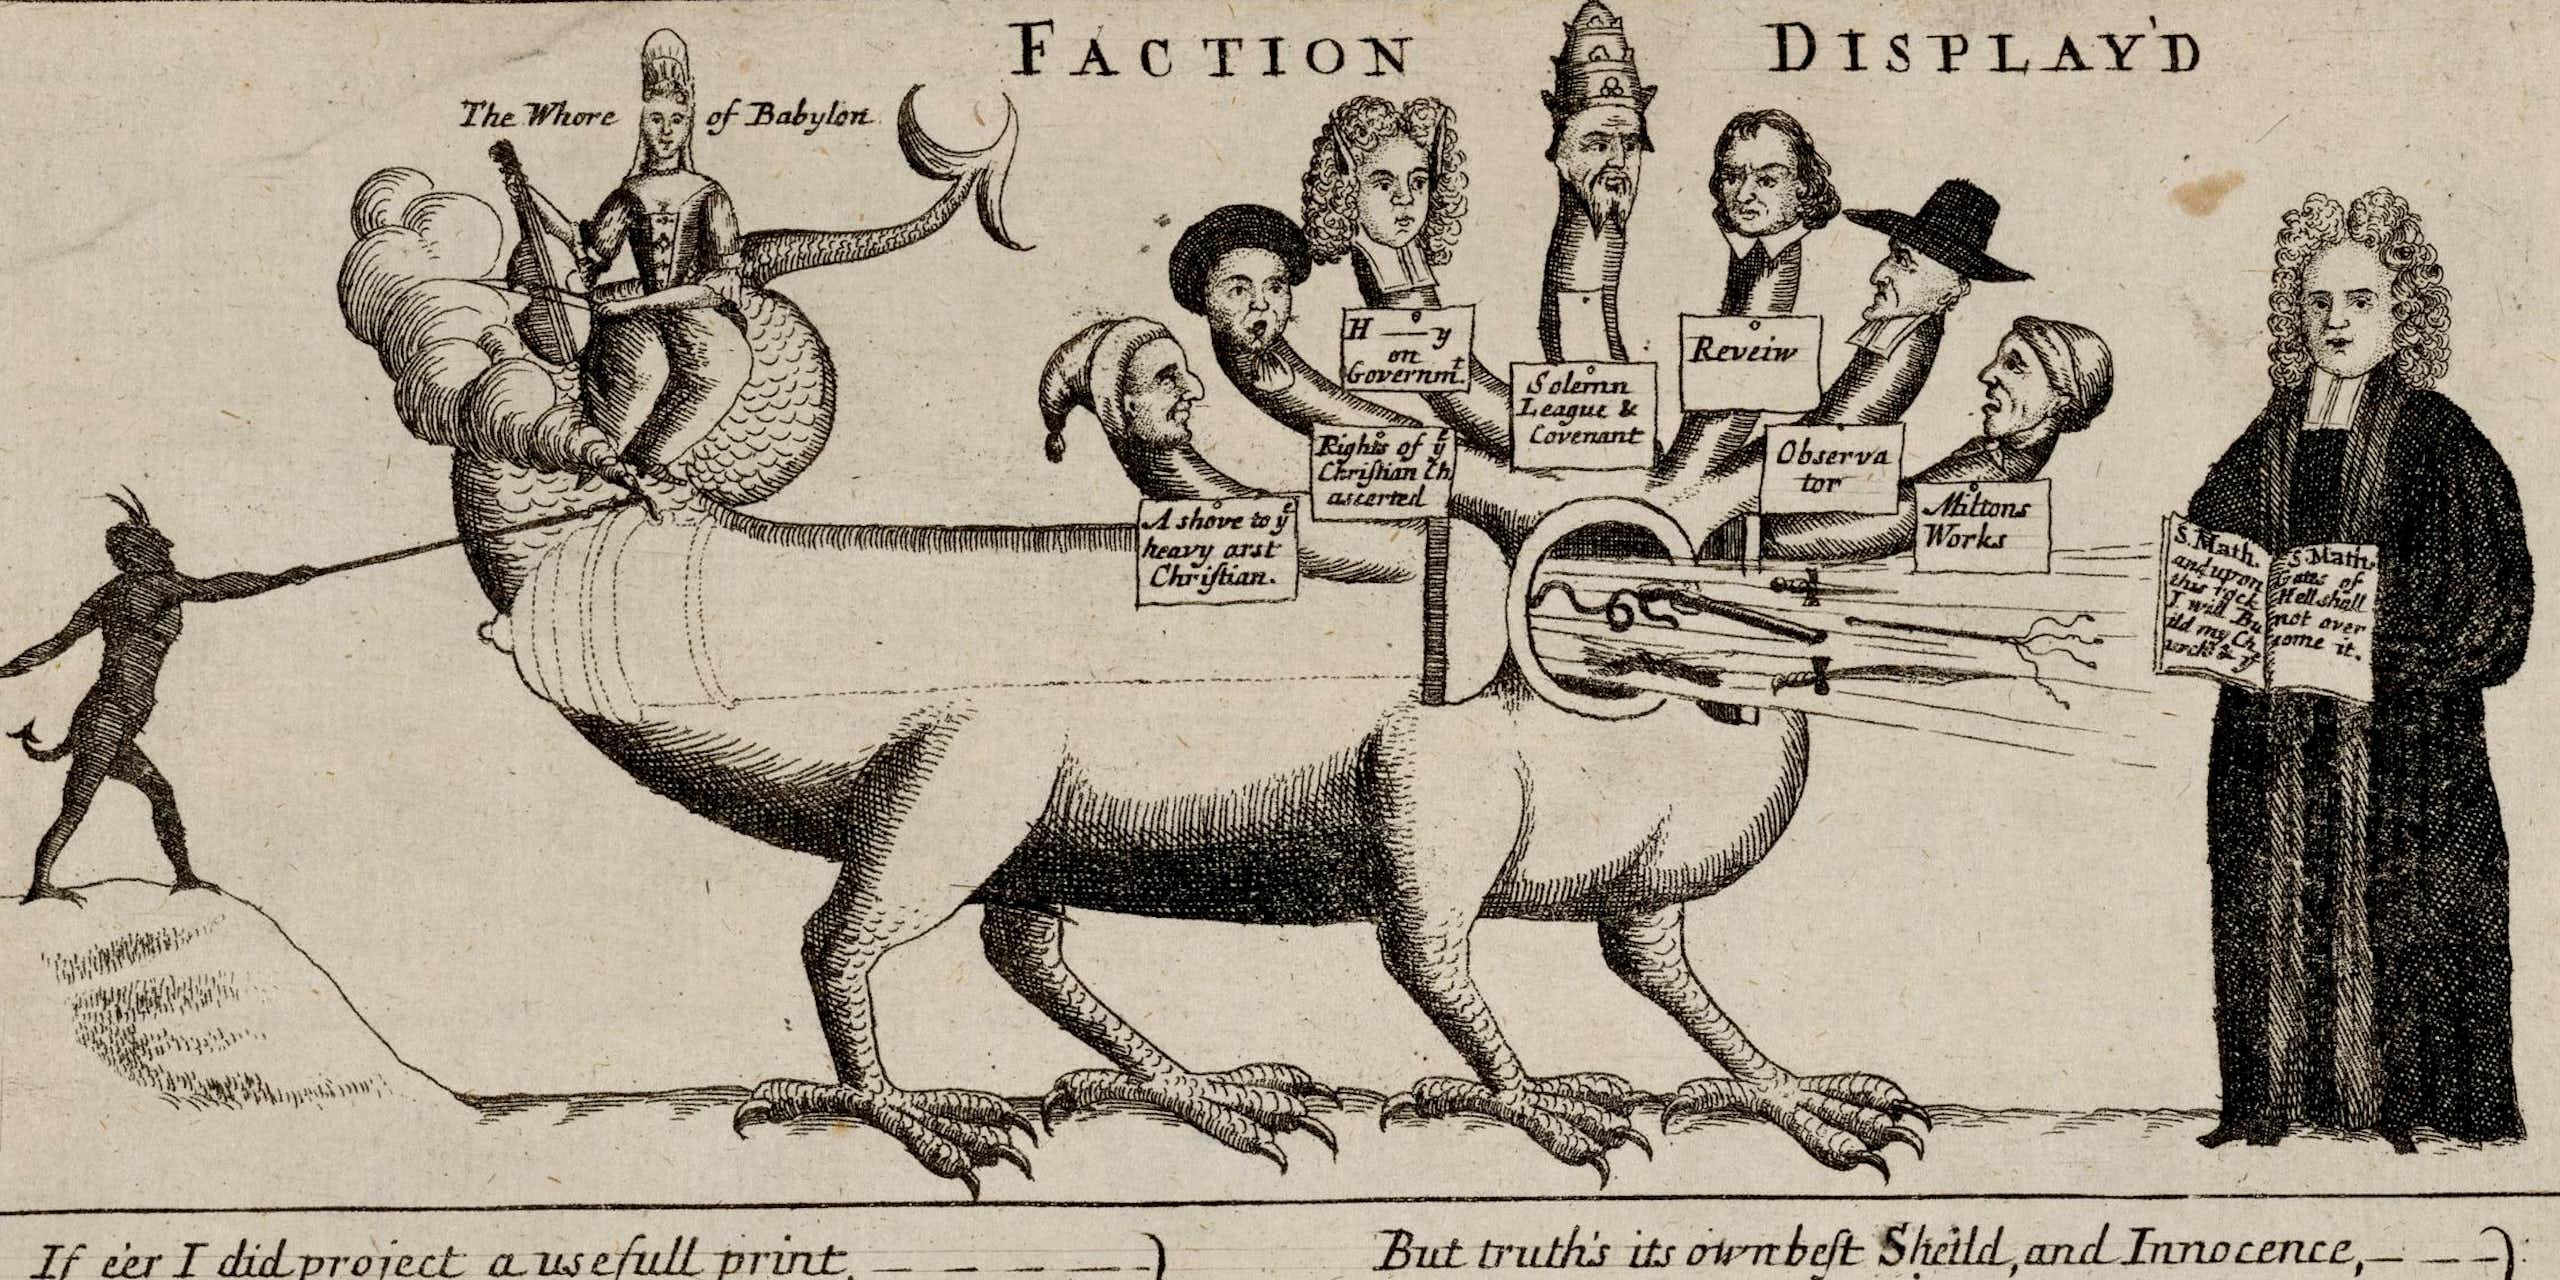 A satirical drawing from the 18th century.